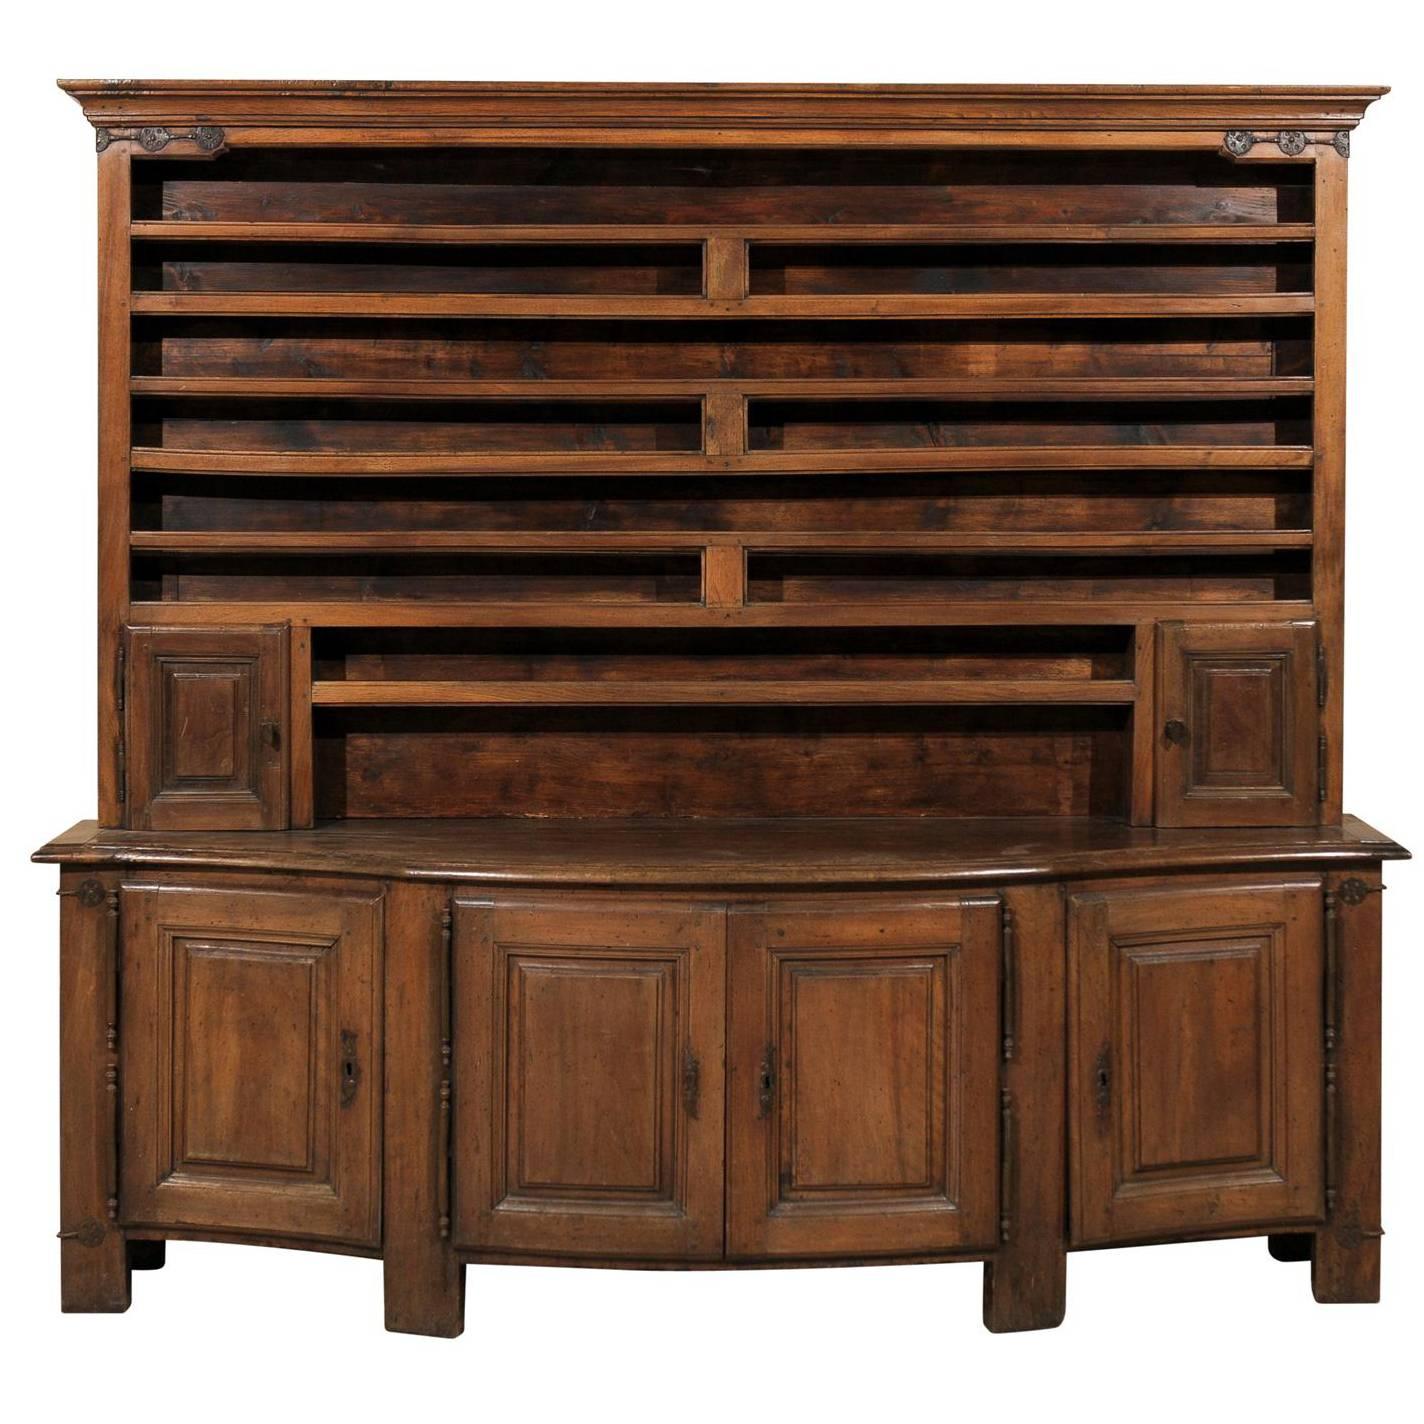 English Large-Size Wood Vaisselier / Storage Cabinet w/ Bowed Front, 19th C